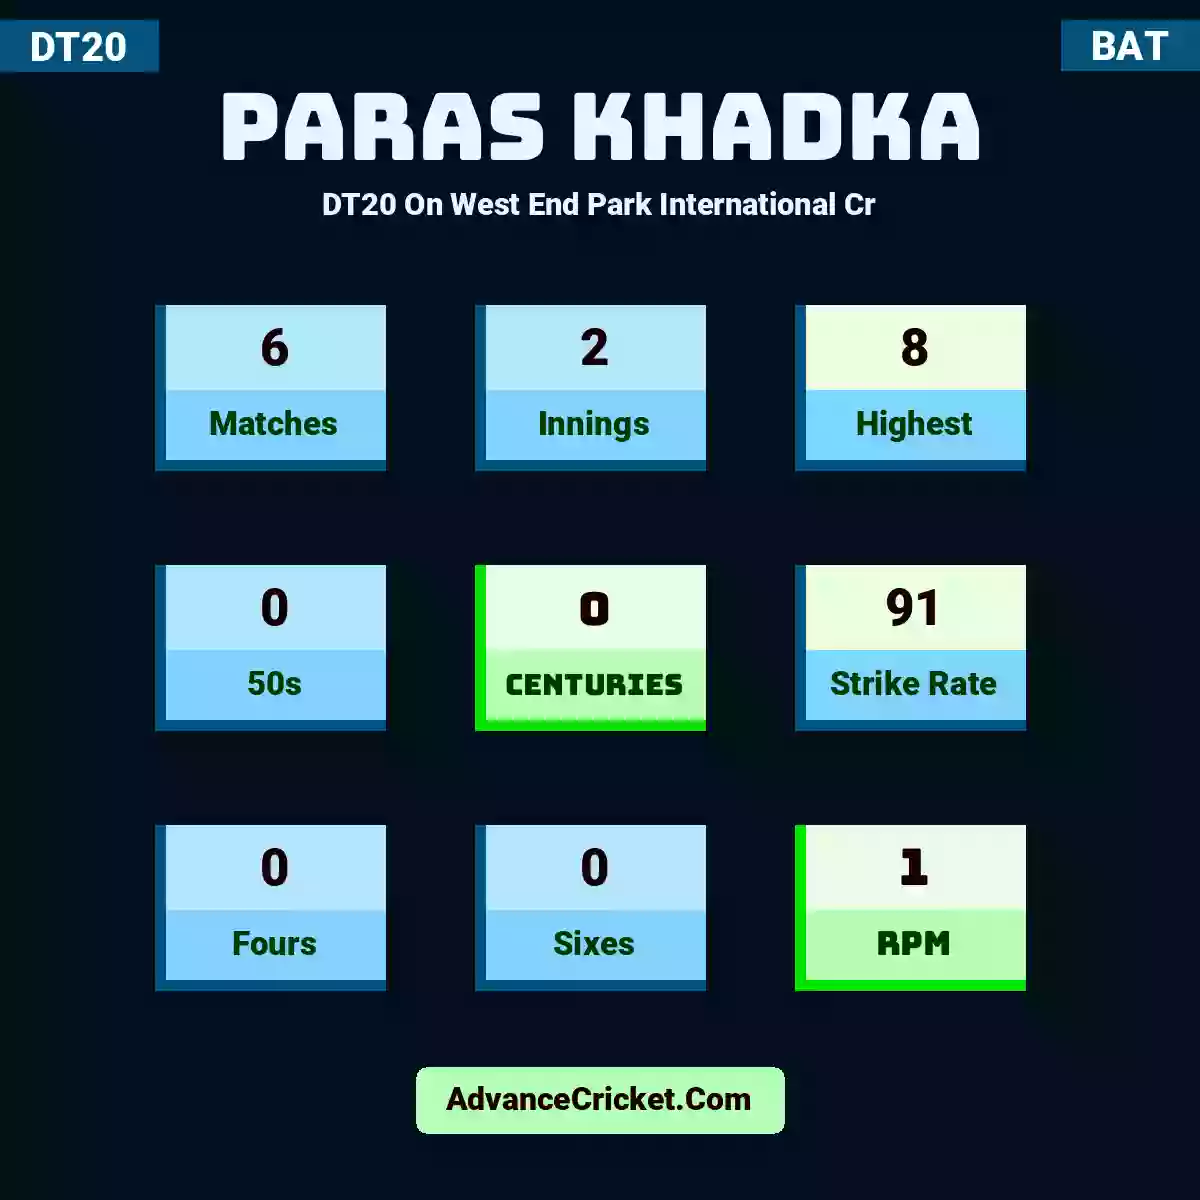 Paras Khadka DT20  On West End Park International Cr, Paras Khadka played 6 matches, scored 8 runs as highest, 0 half-centuries, and 0 centuries, with a strike rate of 91. P.Khadka hit 0 fours and 0 sixes, with an RPM of 1.